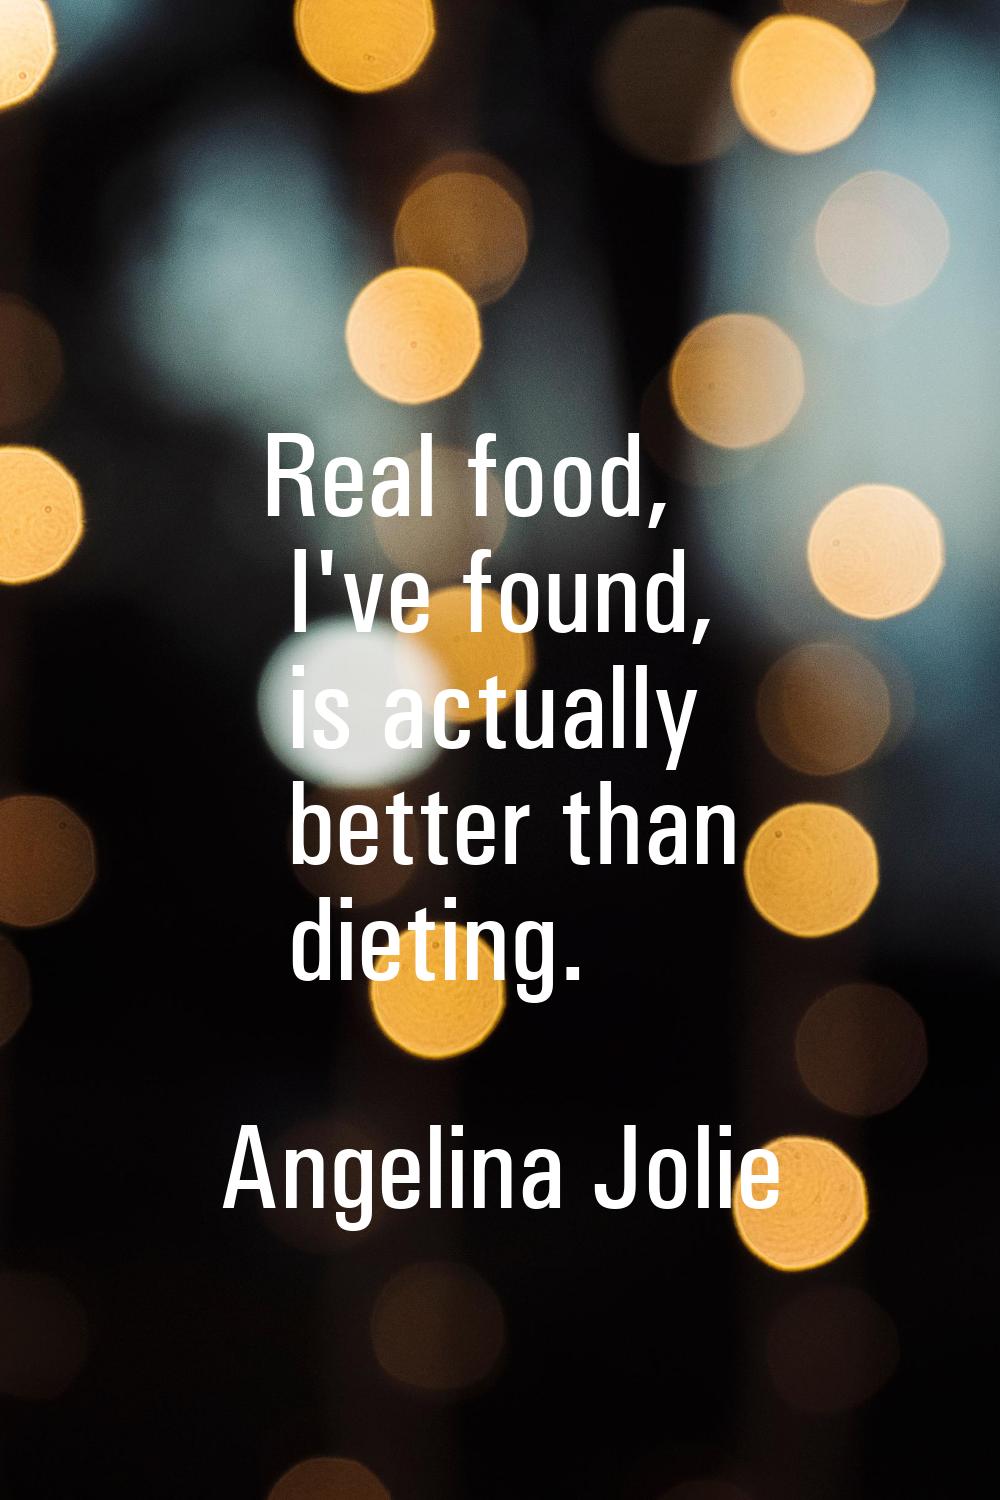 Real food, I've found, is actually better than dieting.